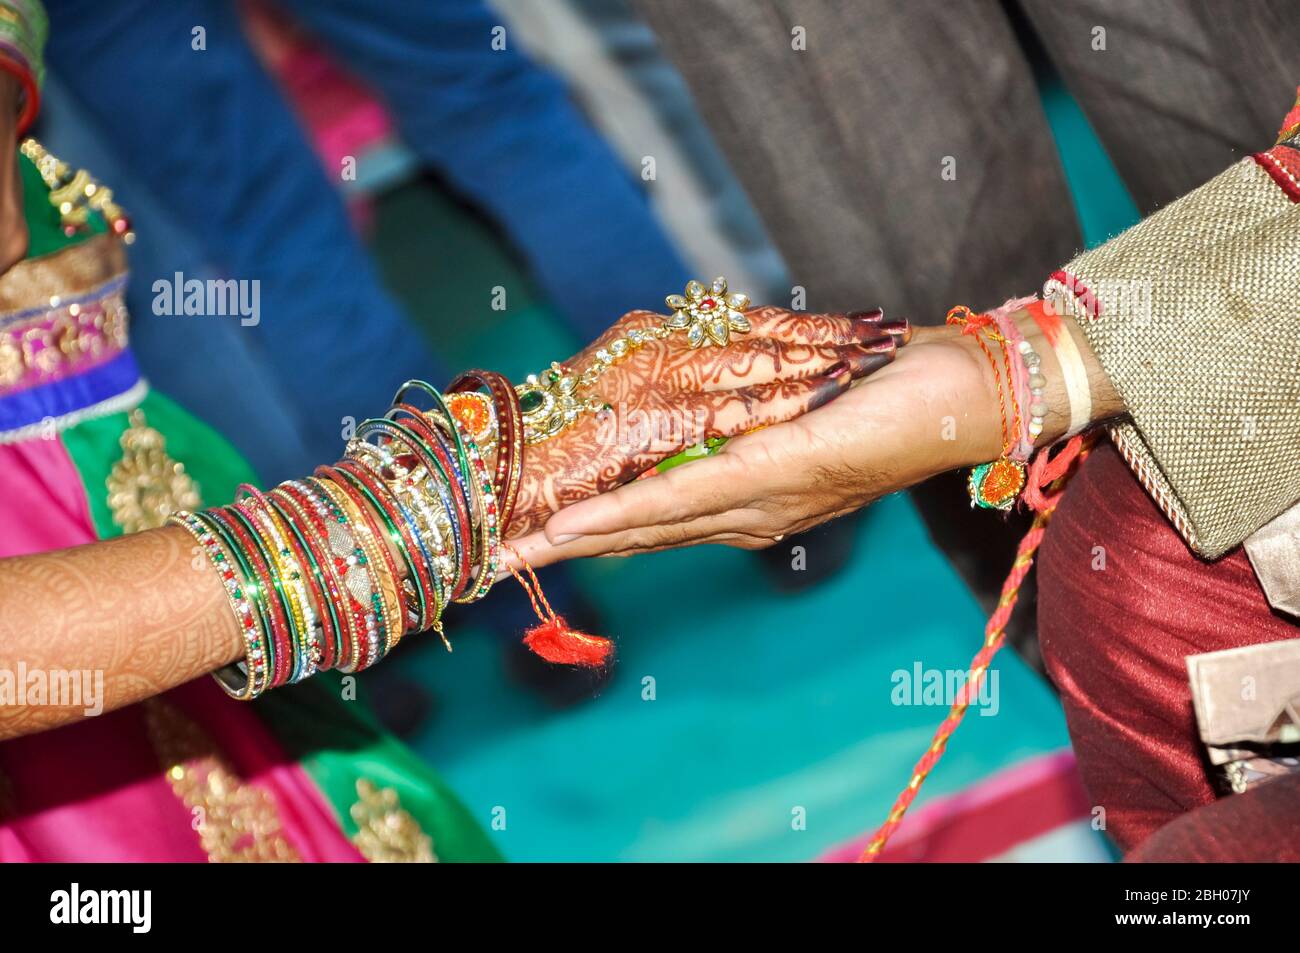 Indian couple's hand in hand in a wedding, Indian marriage traditions Stock Photo